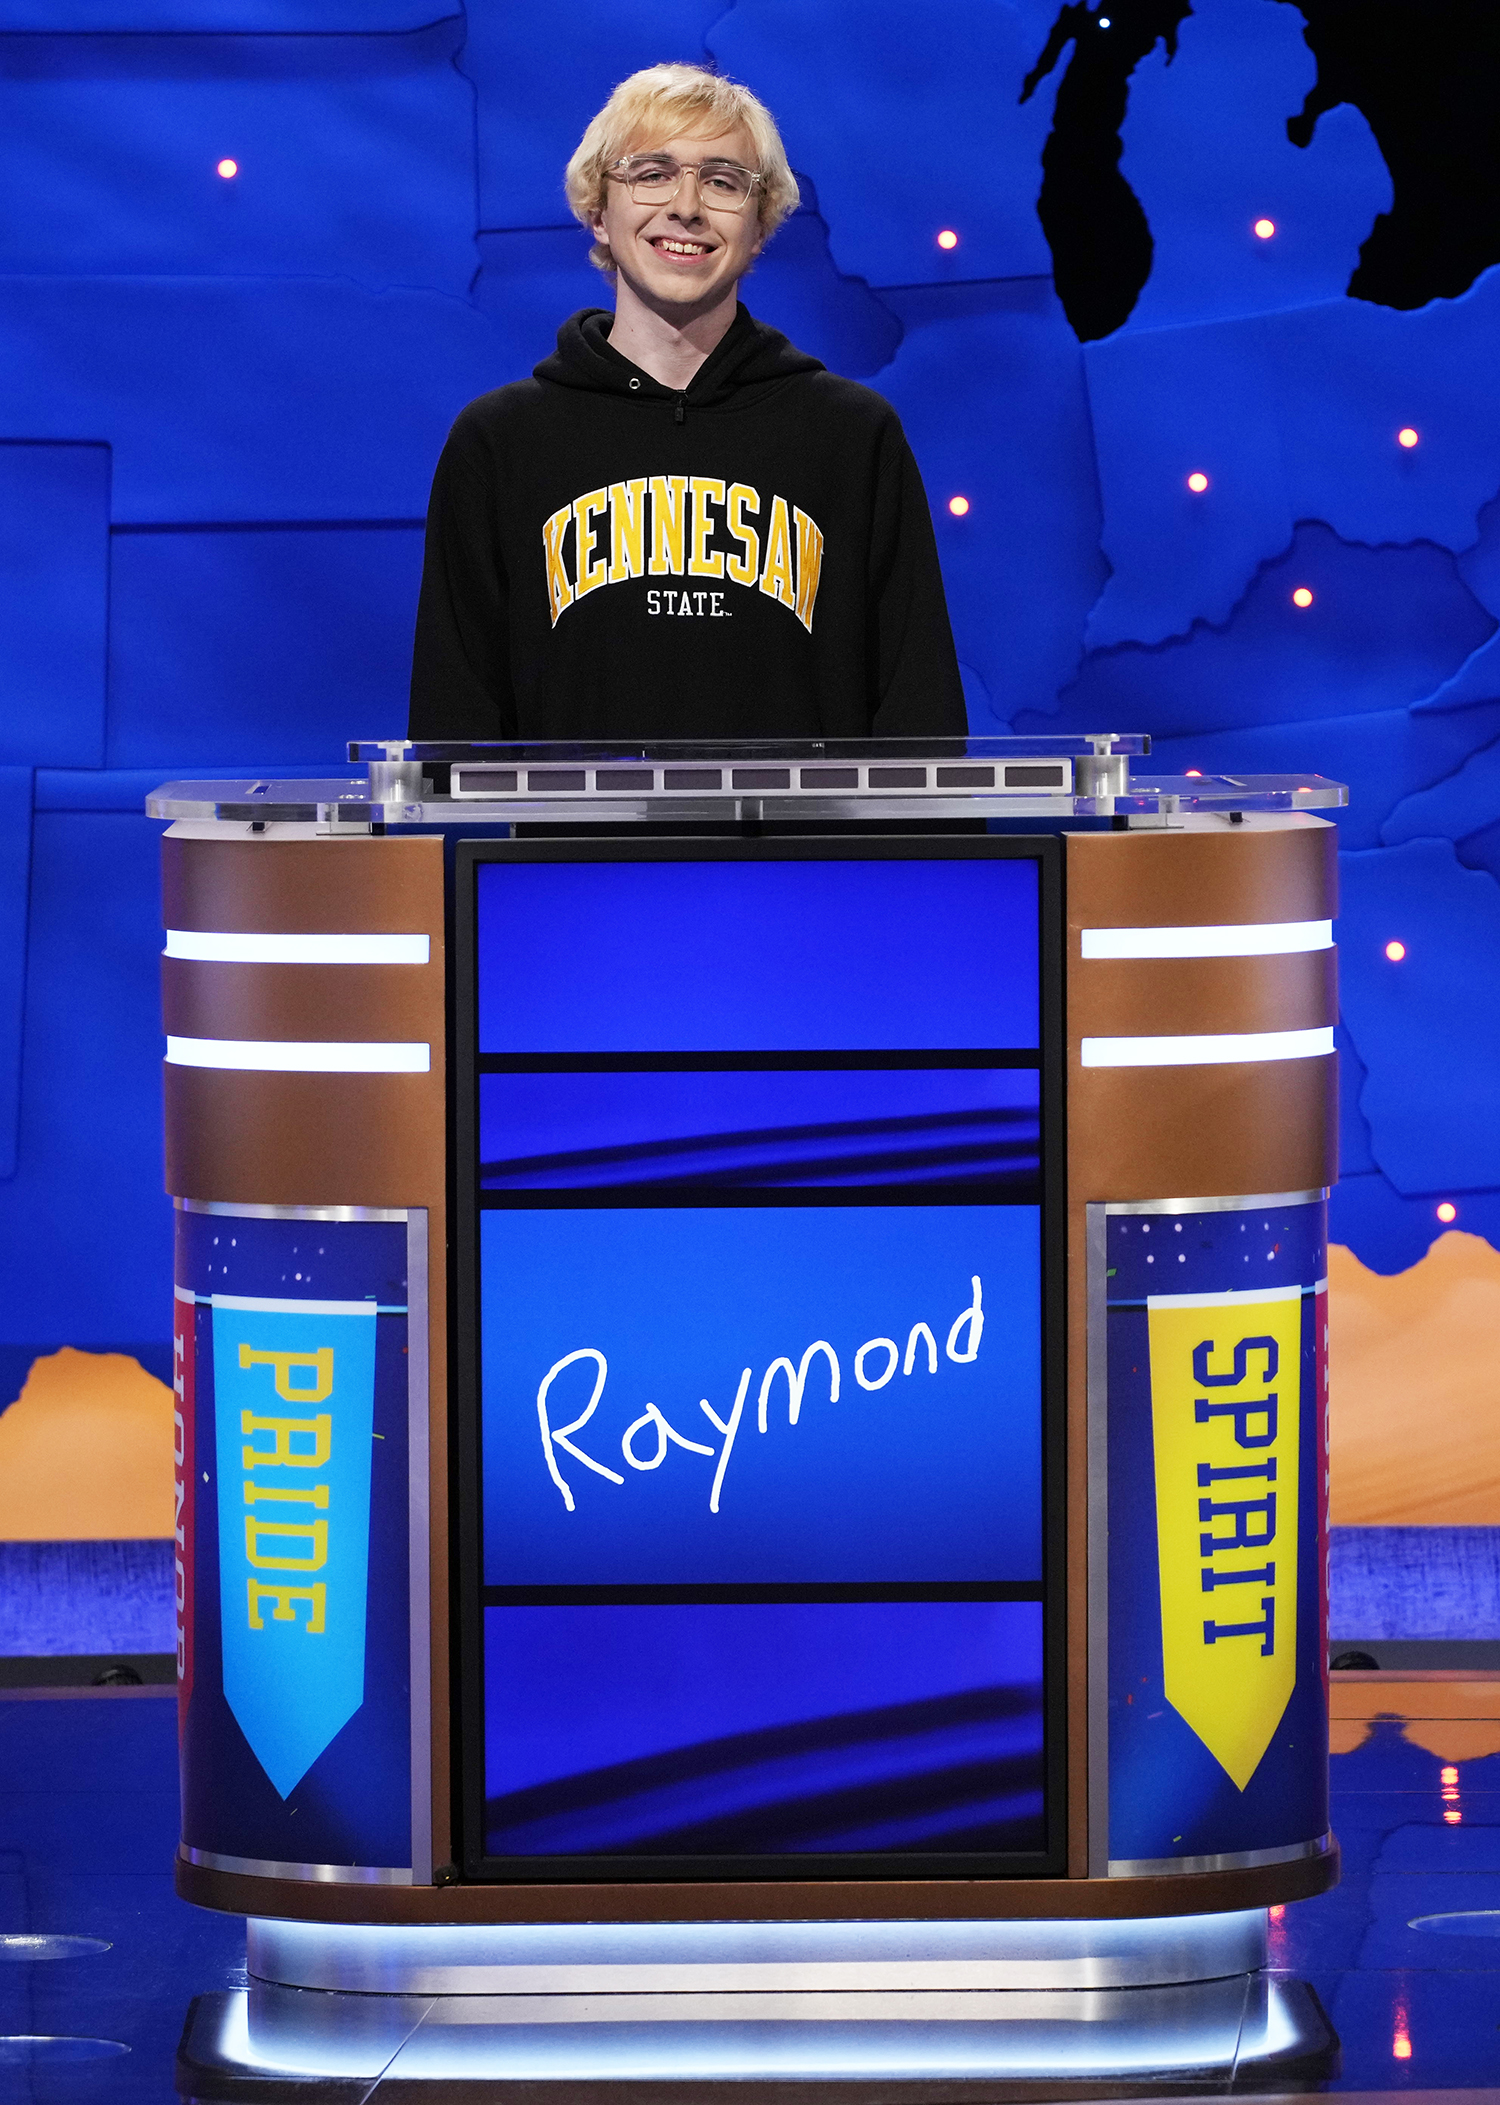 Alumnus to compete in Jeopardy! National College Championship